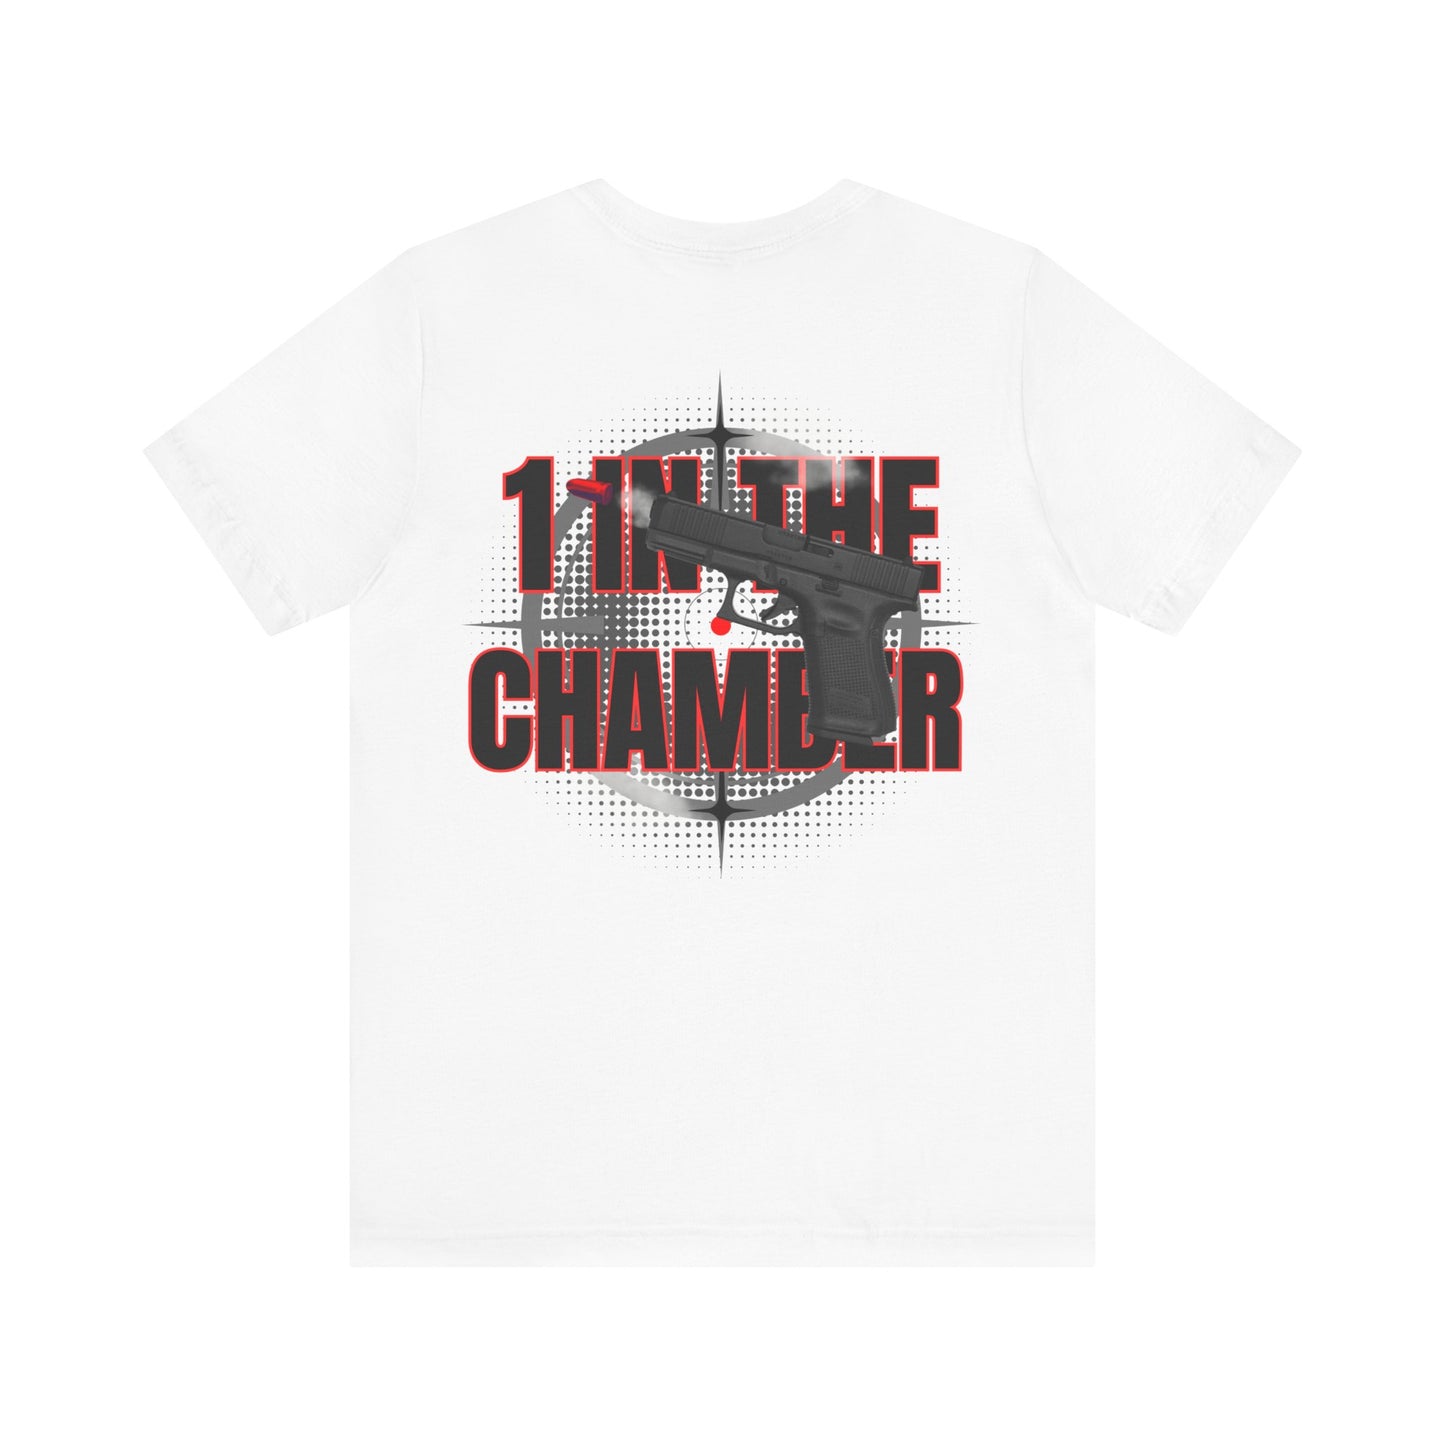 "1 IN THE CHAMBER" Graphic T-Shirt